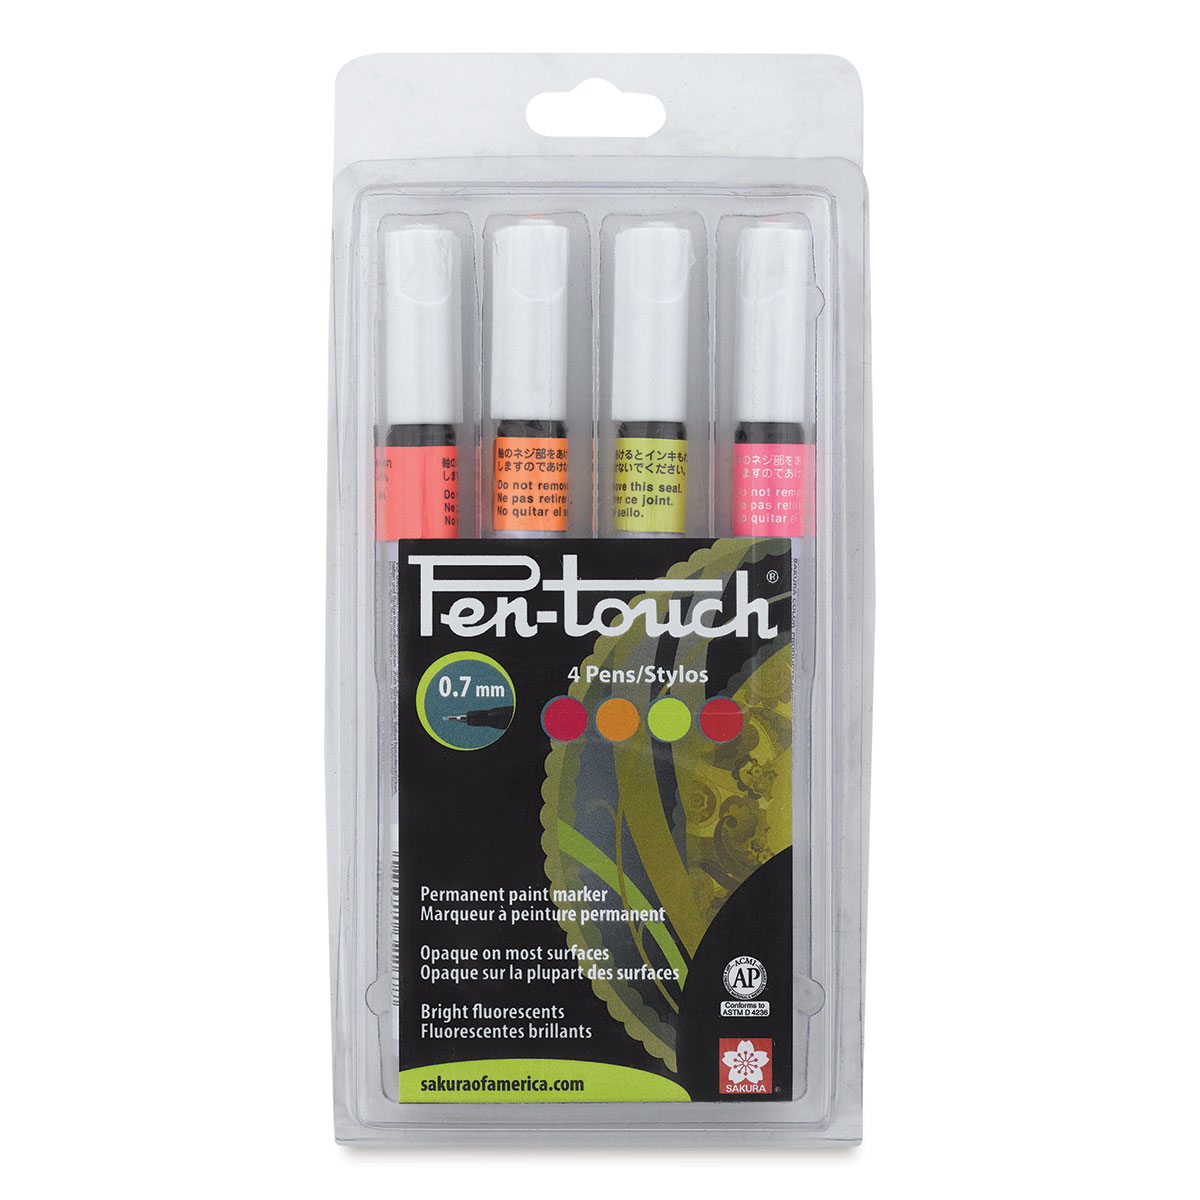 Set of 15 Acrylic Paint Markers Extra-fine Tip 0.7mm Special